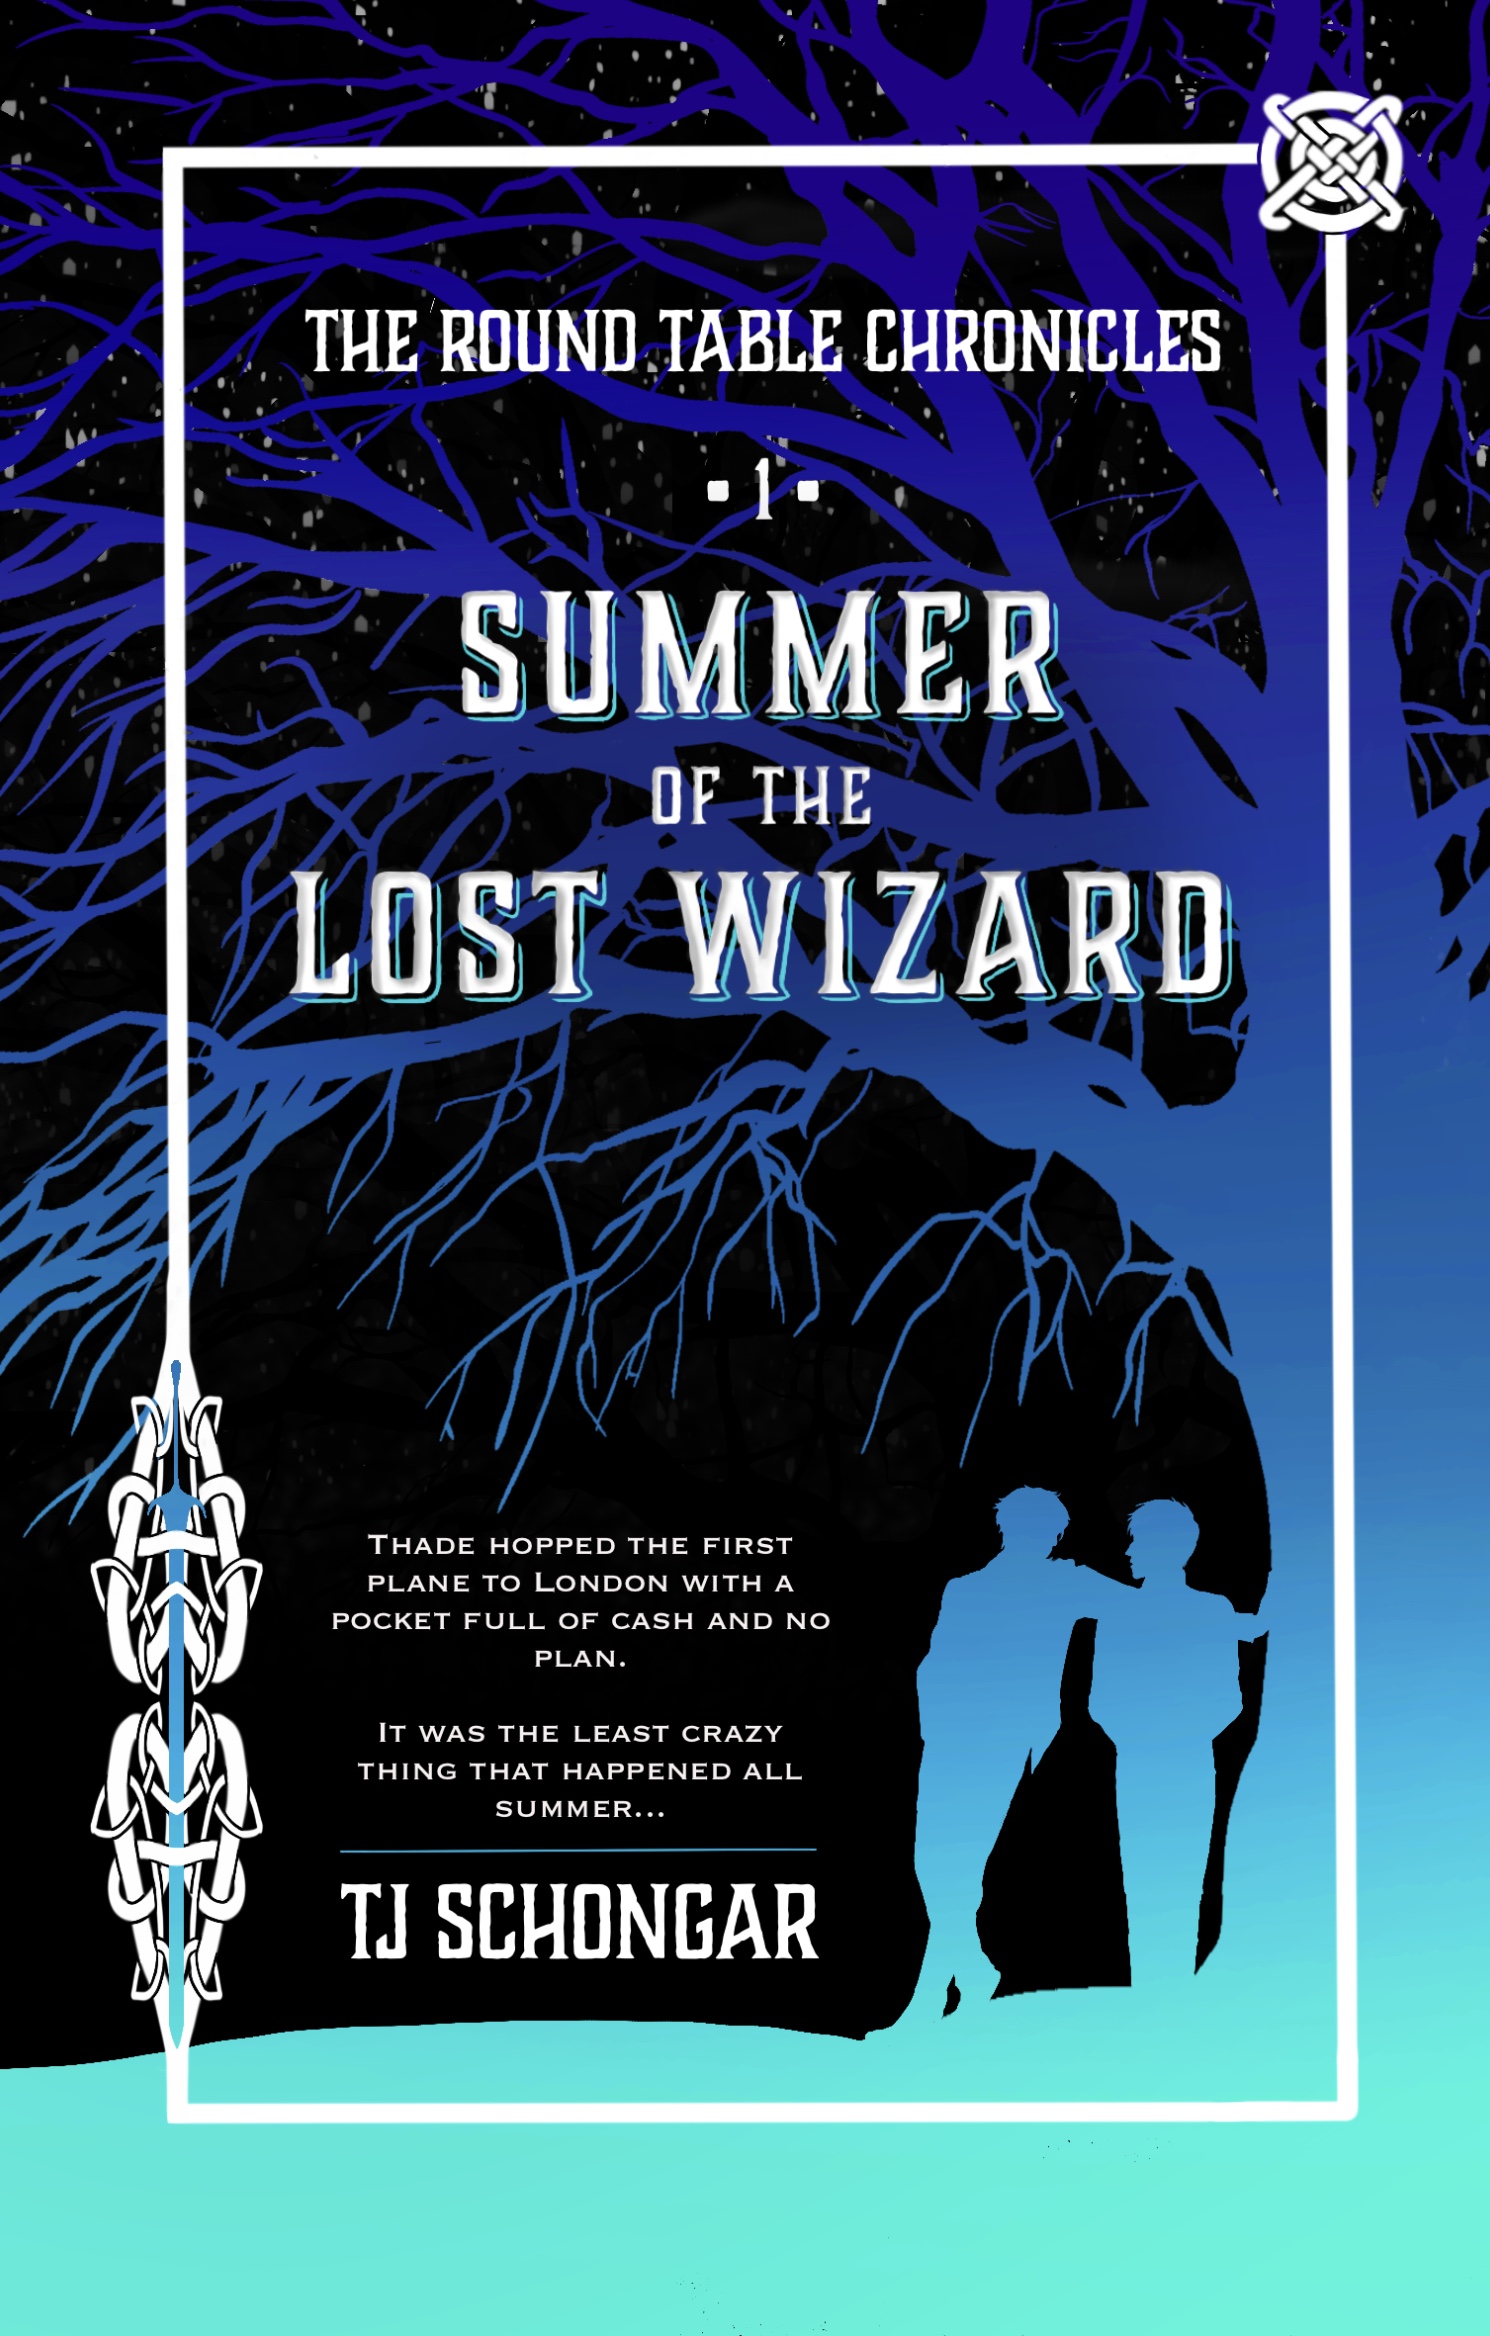 The cover of The Round Table Chronicles Book 1: Summer of the Lost Wizard. The cover features a silhouette of two men standing next to a tree, with the taller leaning over the shorter man. The silhouette fades from cyan at bottom to dark royal blue/